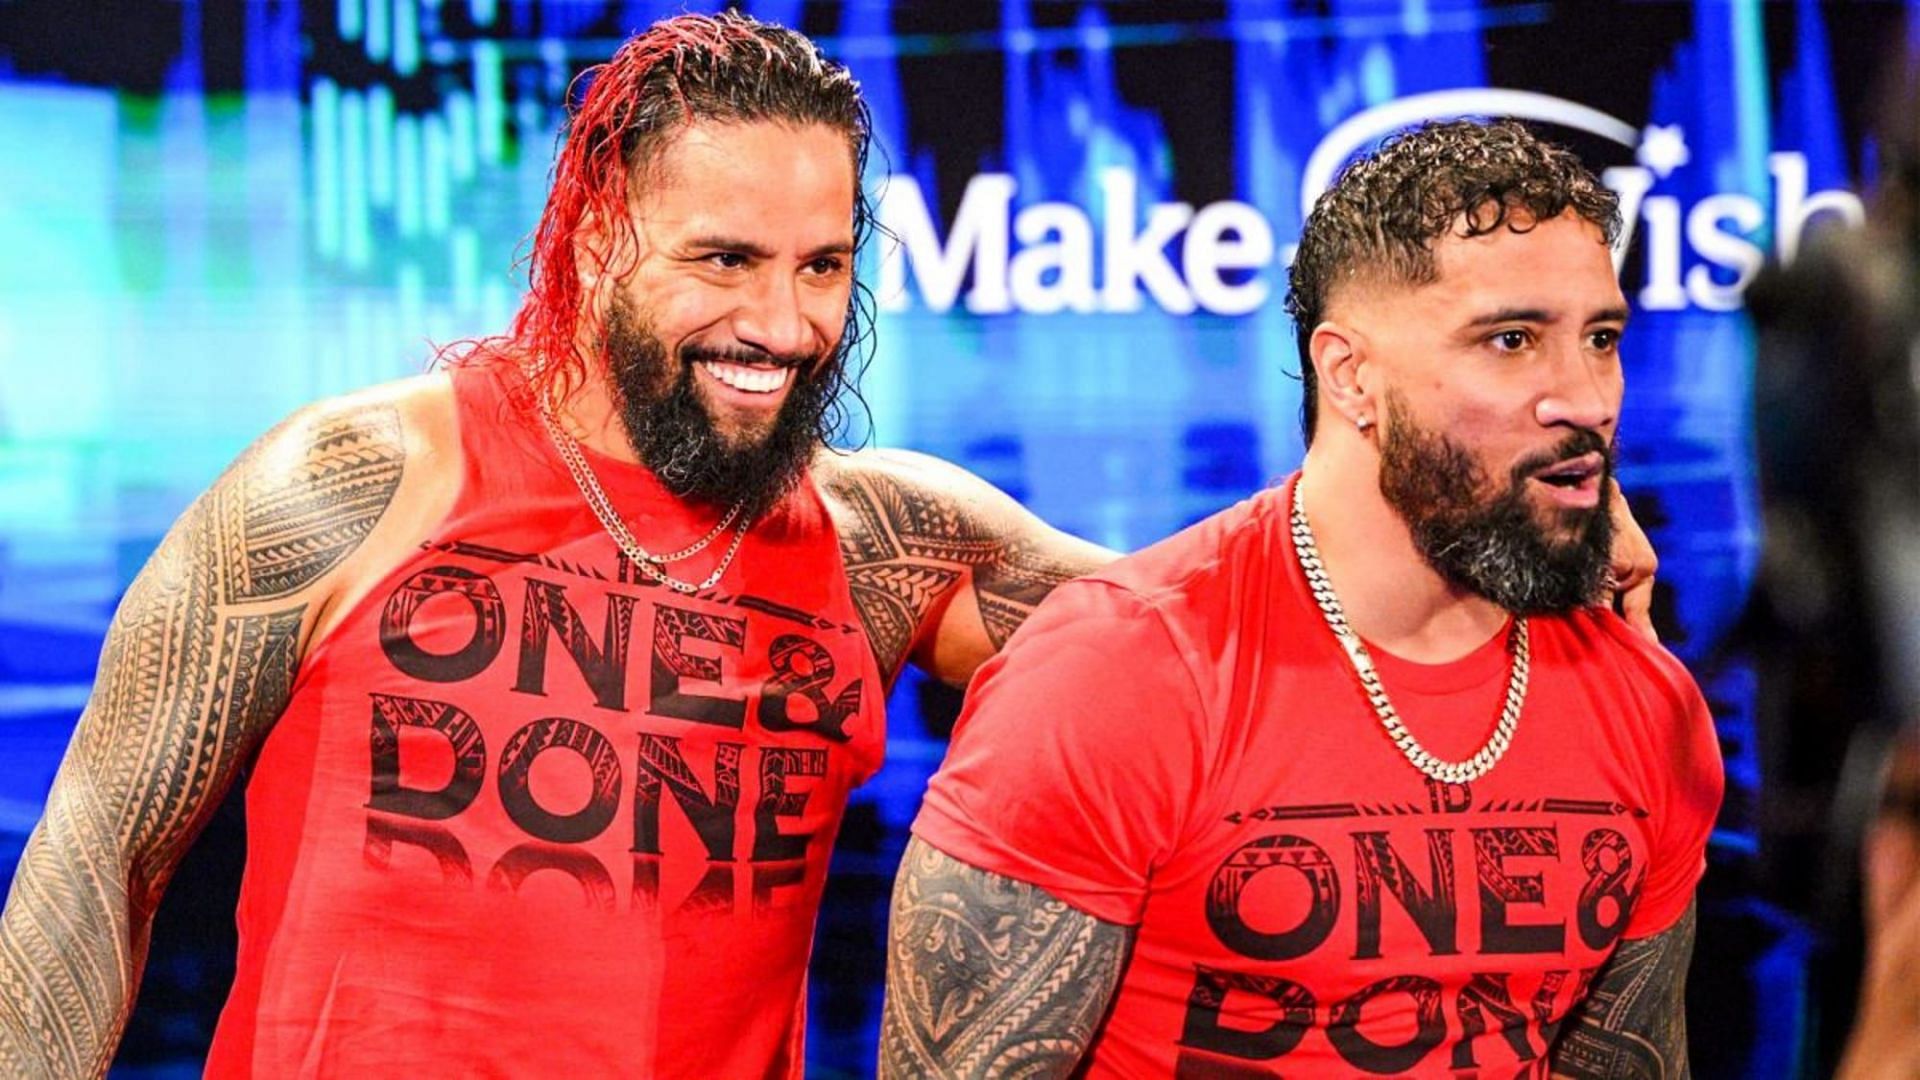 The Usos are one of the most dominant tag teams in recent years